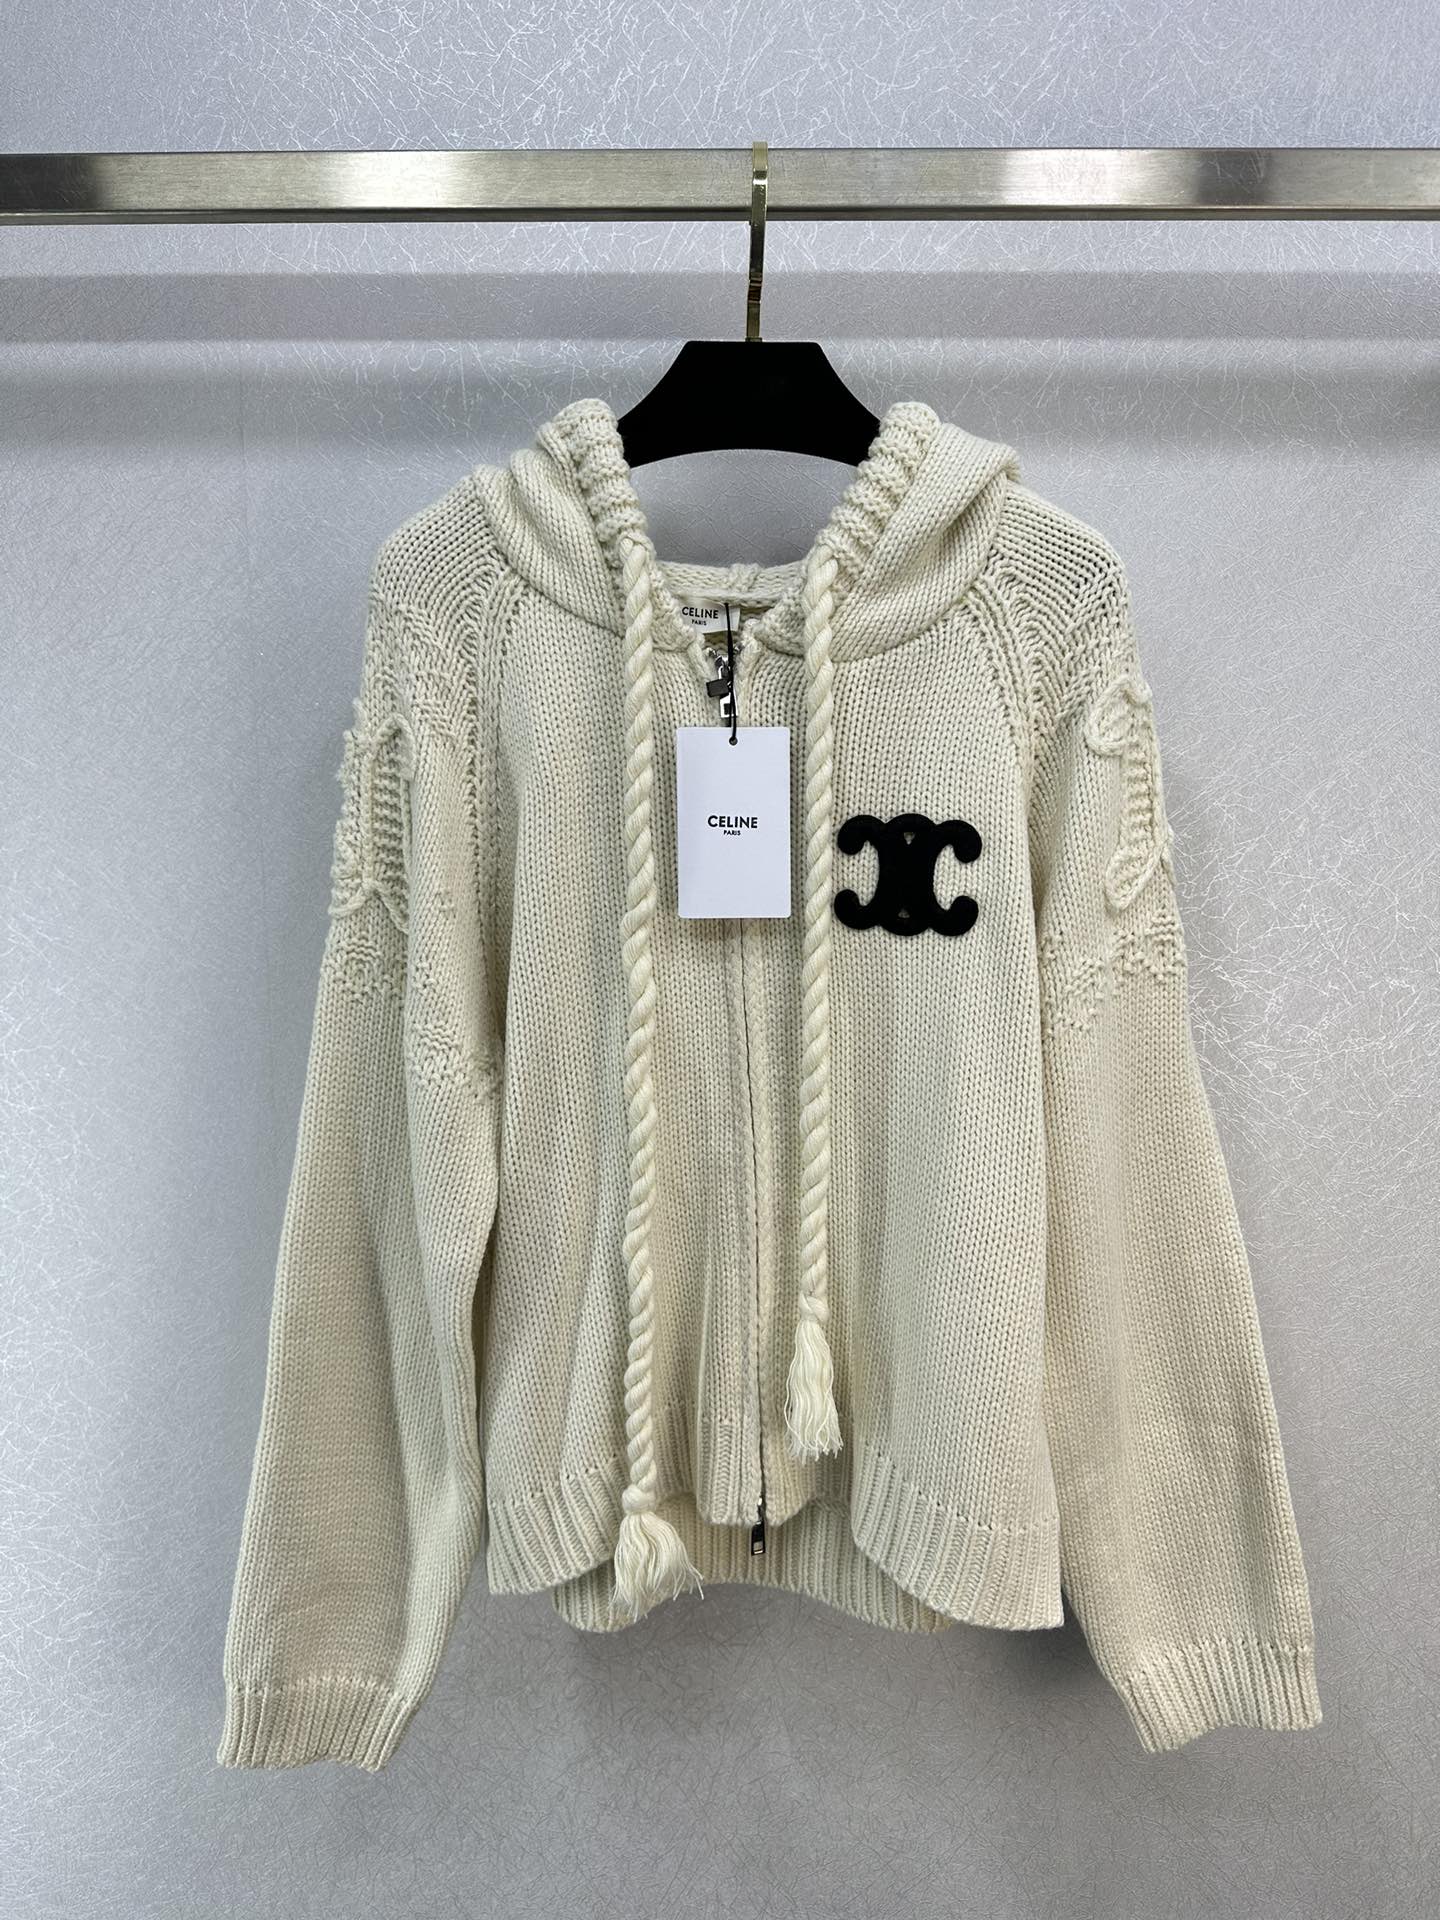 Celine Clothing Cardigans Knit Sweater Weave Knitting Fall/Winter Collection Hooded Top